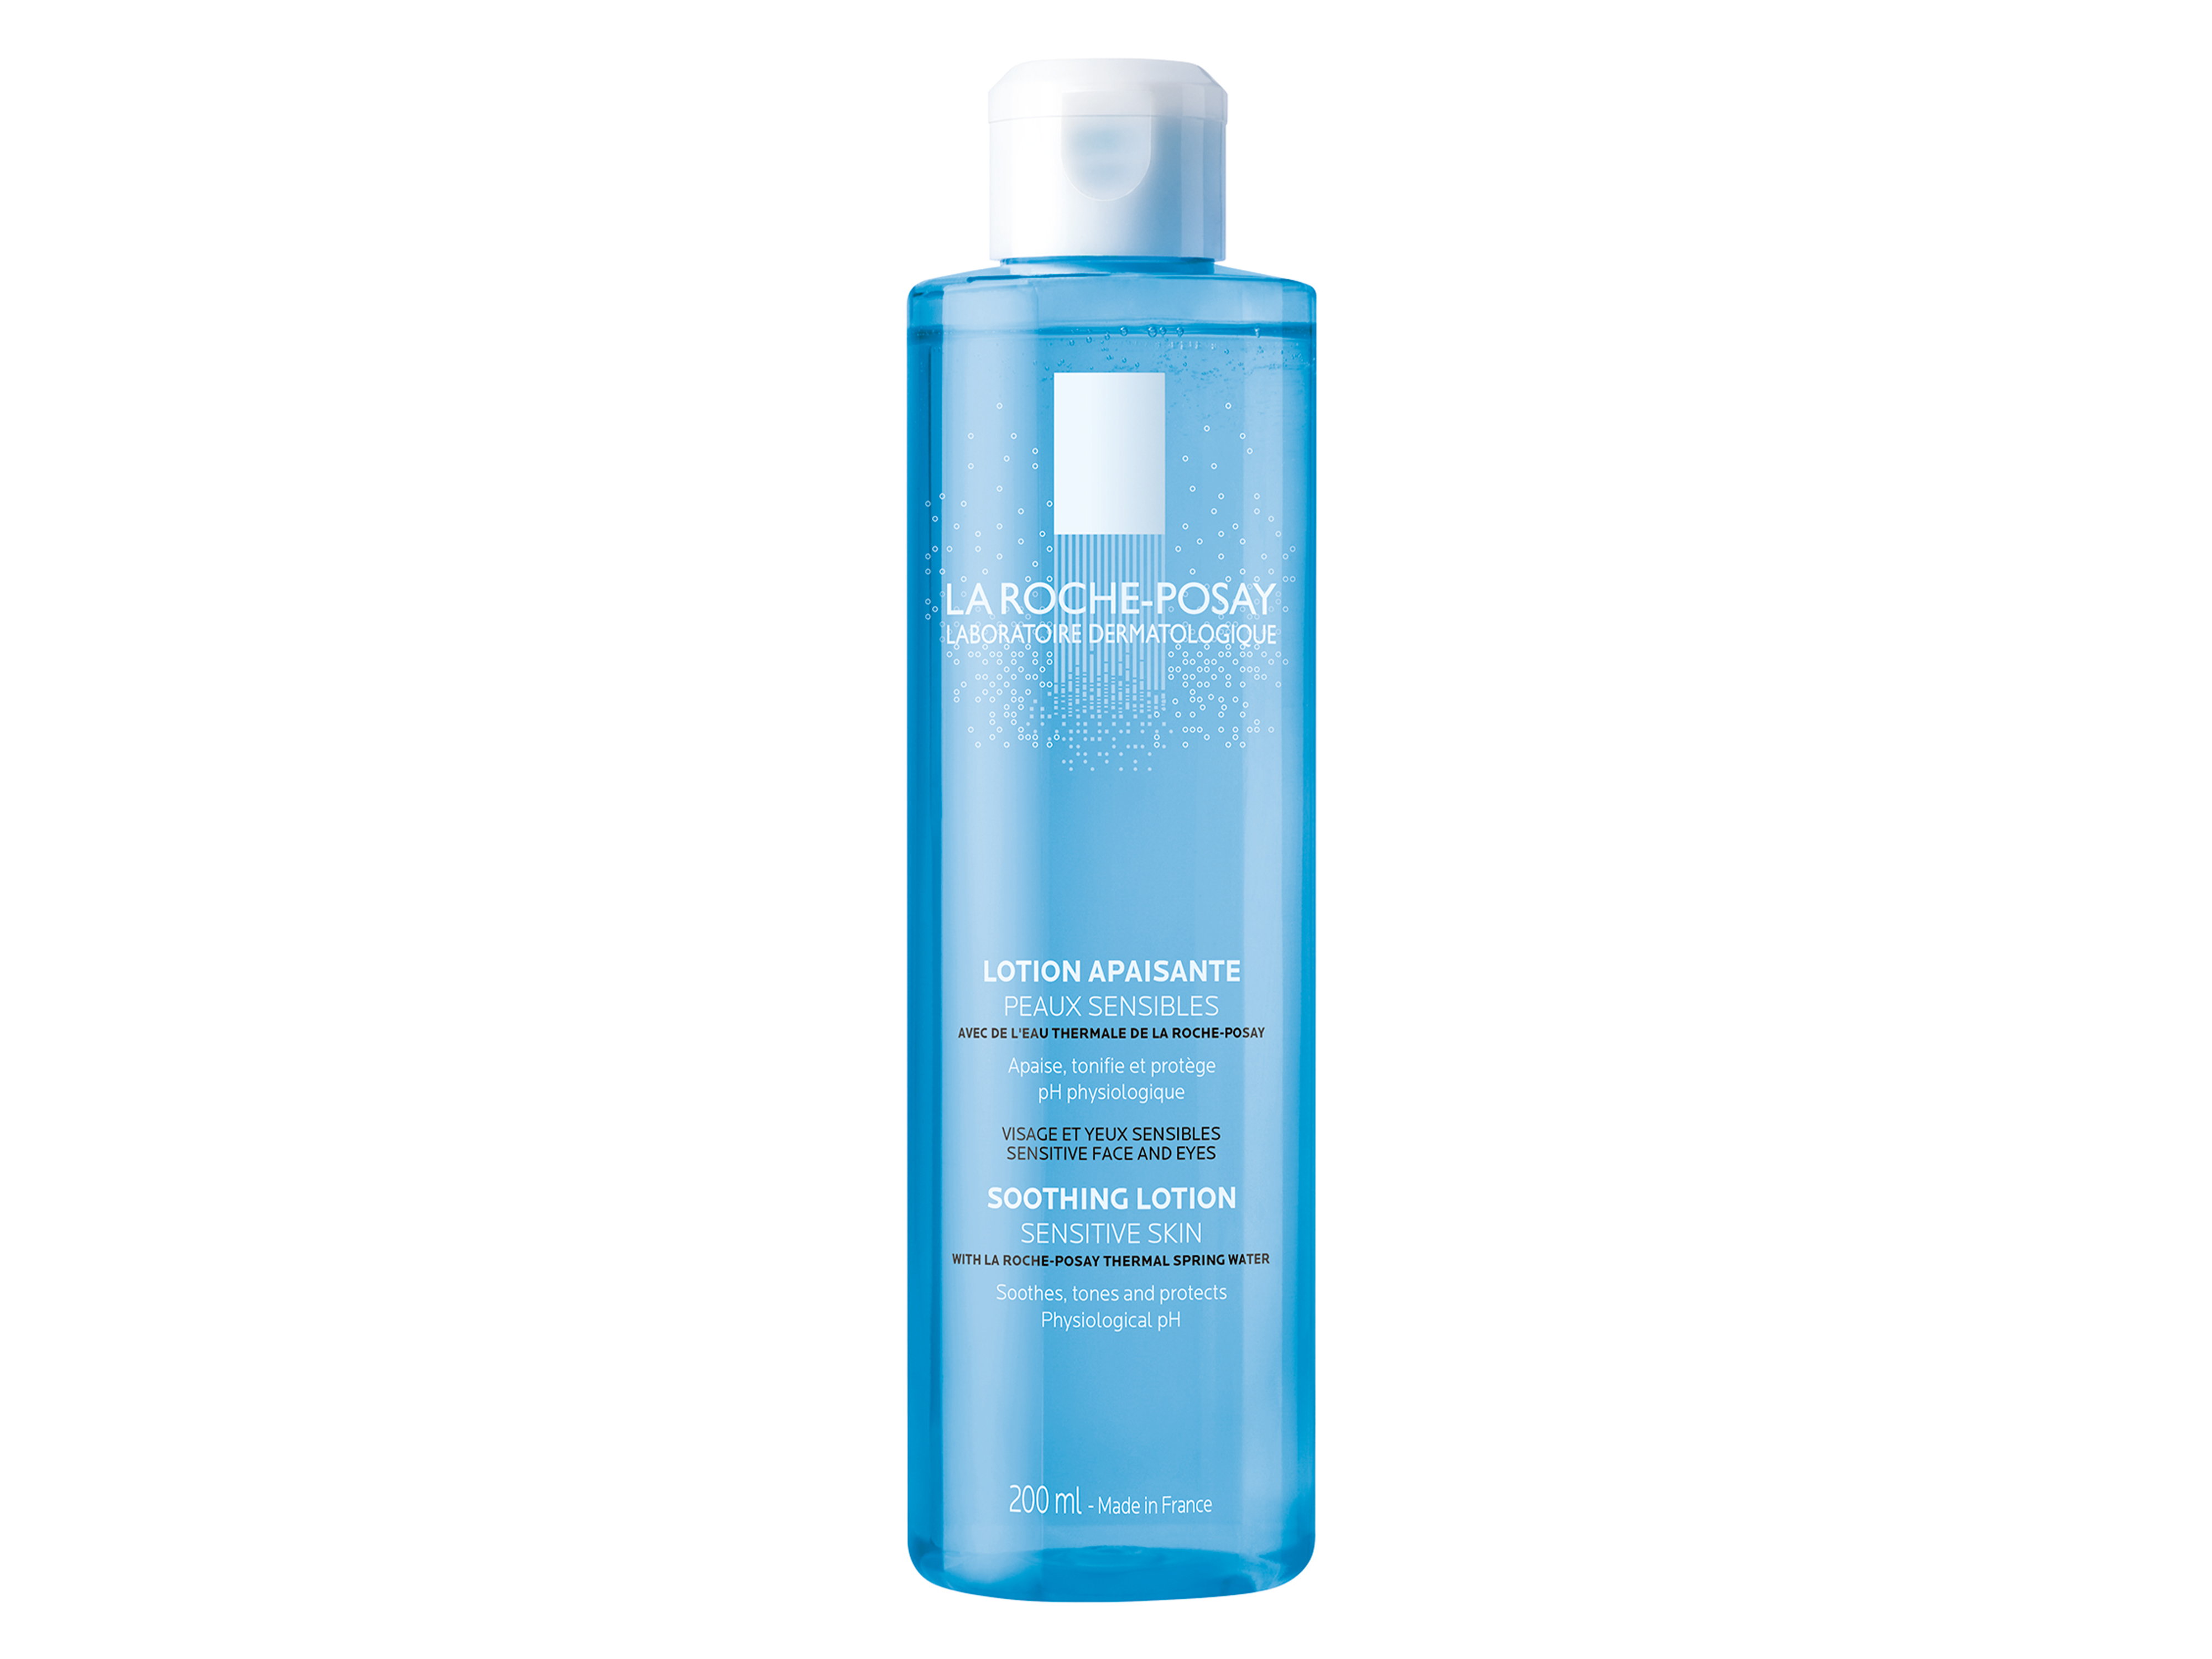 La Roche-Posay Soothing Lotion, 200 ml